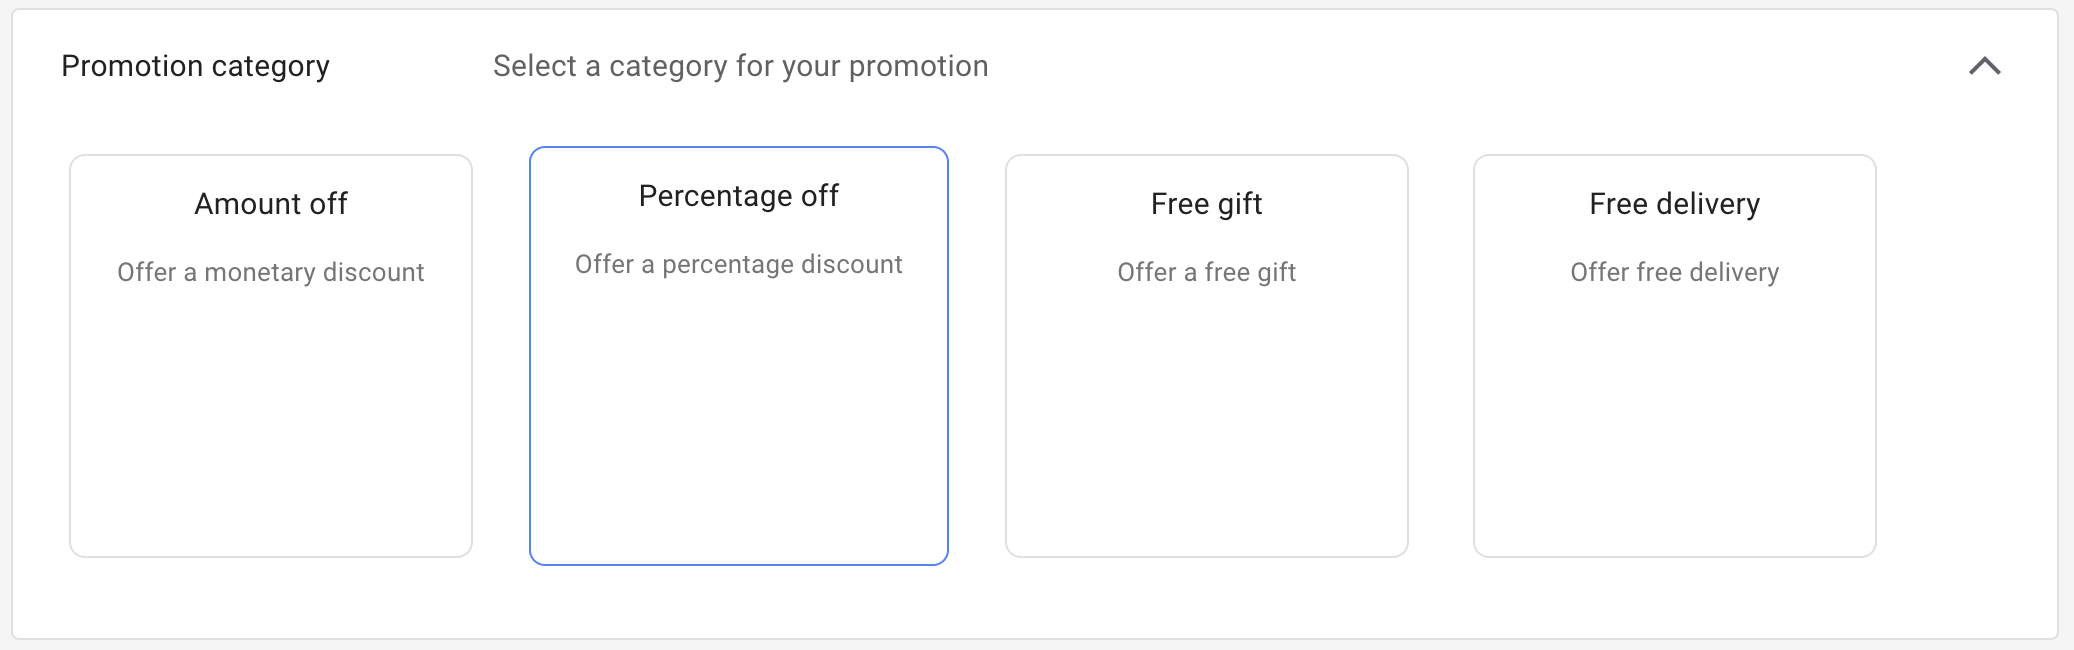 Screen capture of the different promotion options in Google Merchant Center